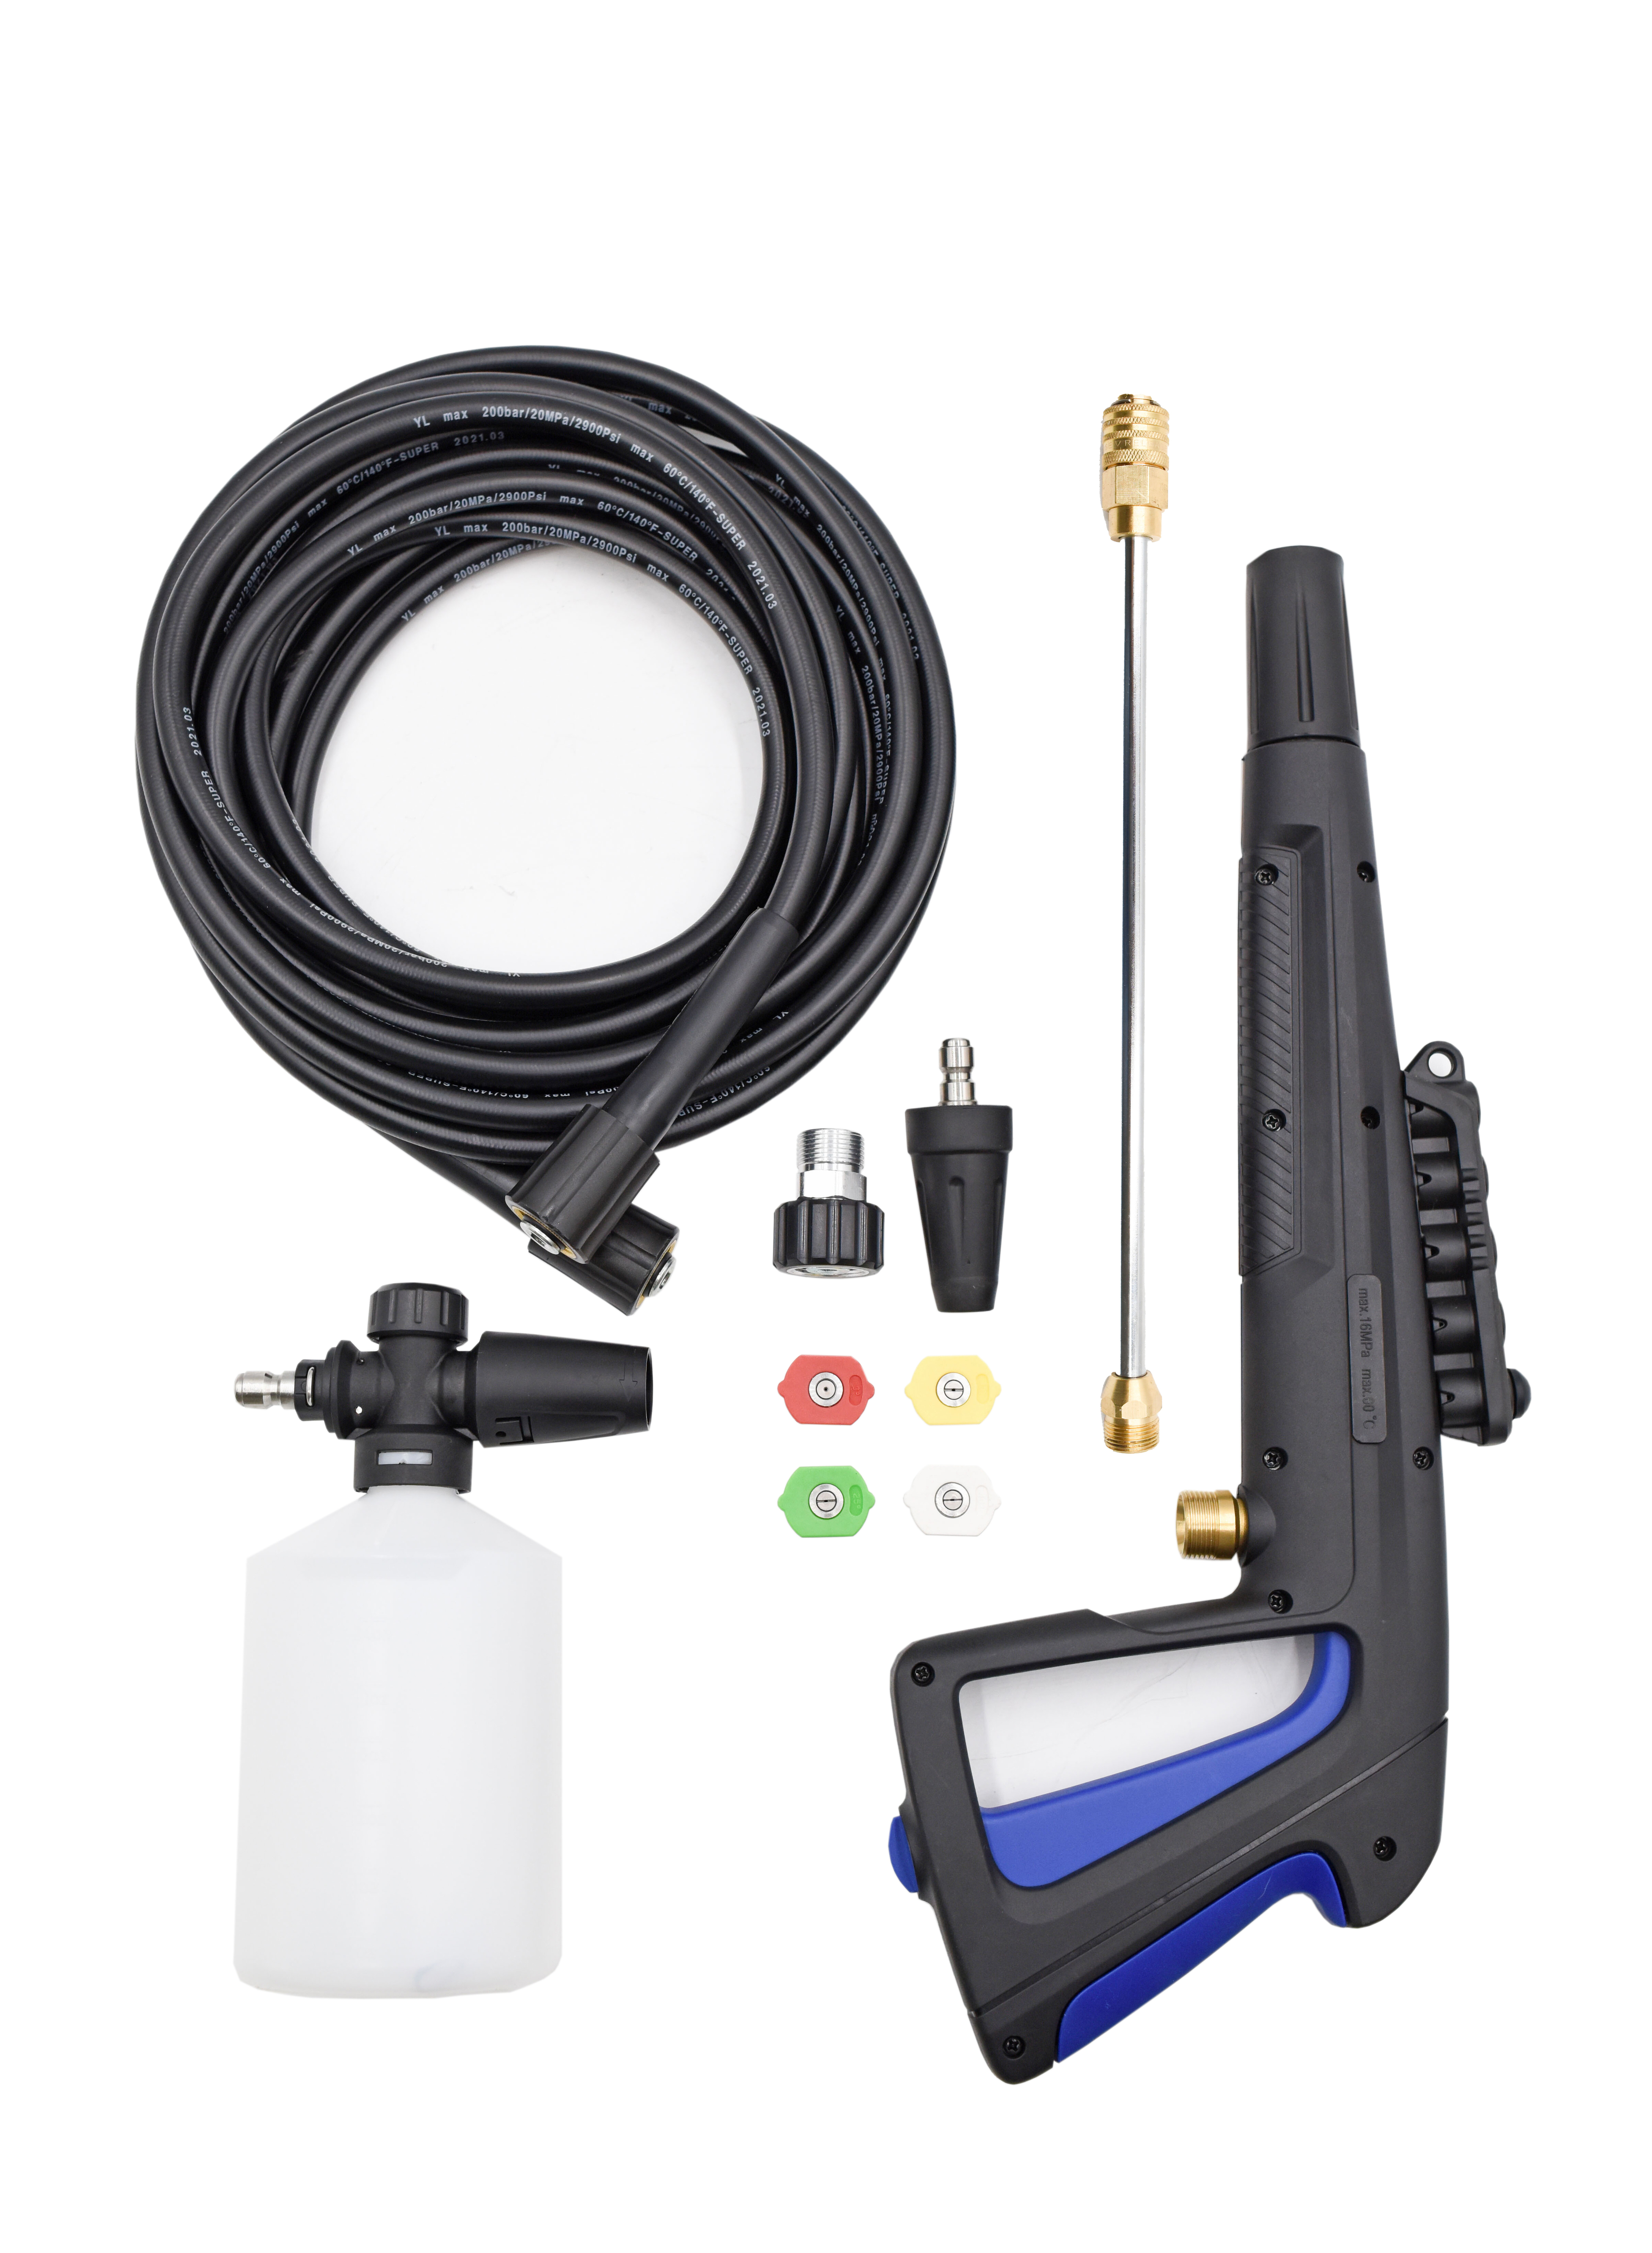 hello , i have blue clean 117 and i want to buy gun with hose can you update me wit the coorect part